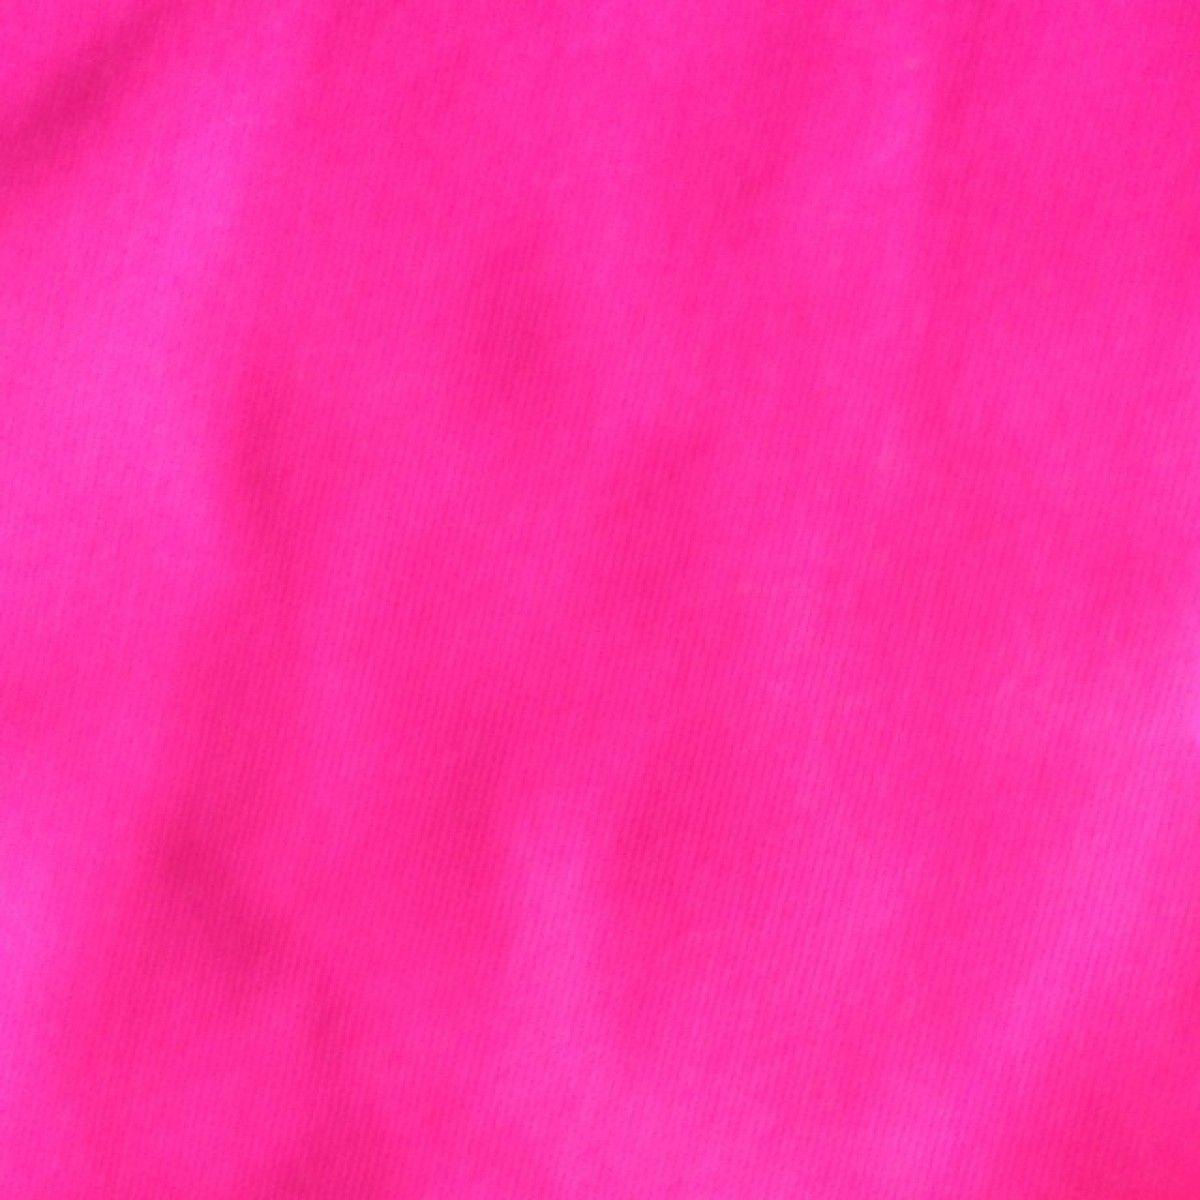 Background Image Of Pink Color